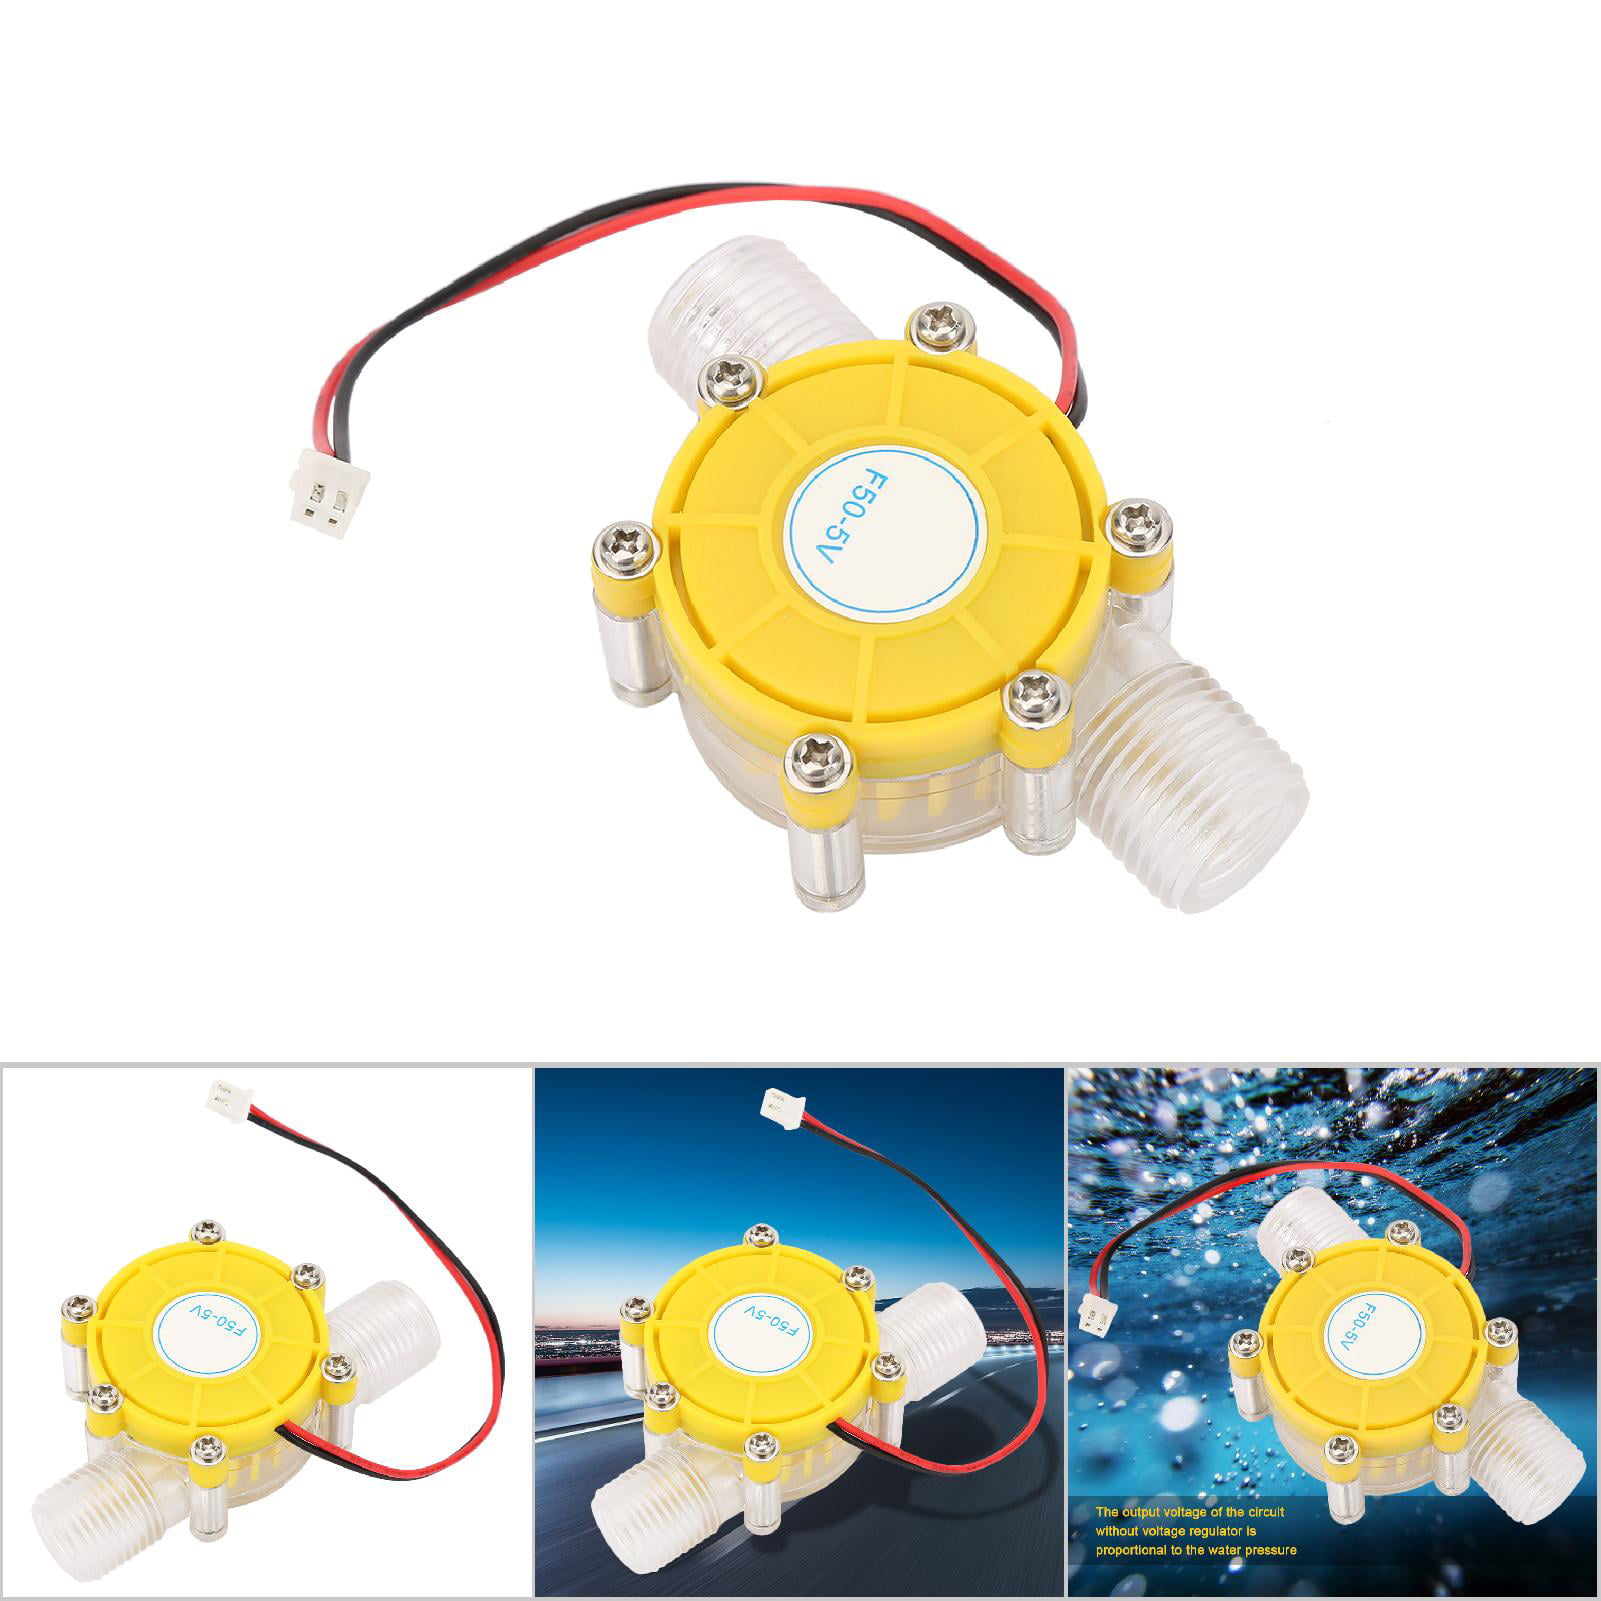 No Rust Low Noise for Power Generation for Home Micro-Hydro Generator F50 5V Transparent Yellow Solid Structure Water Turbine Generator